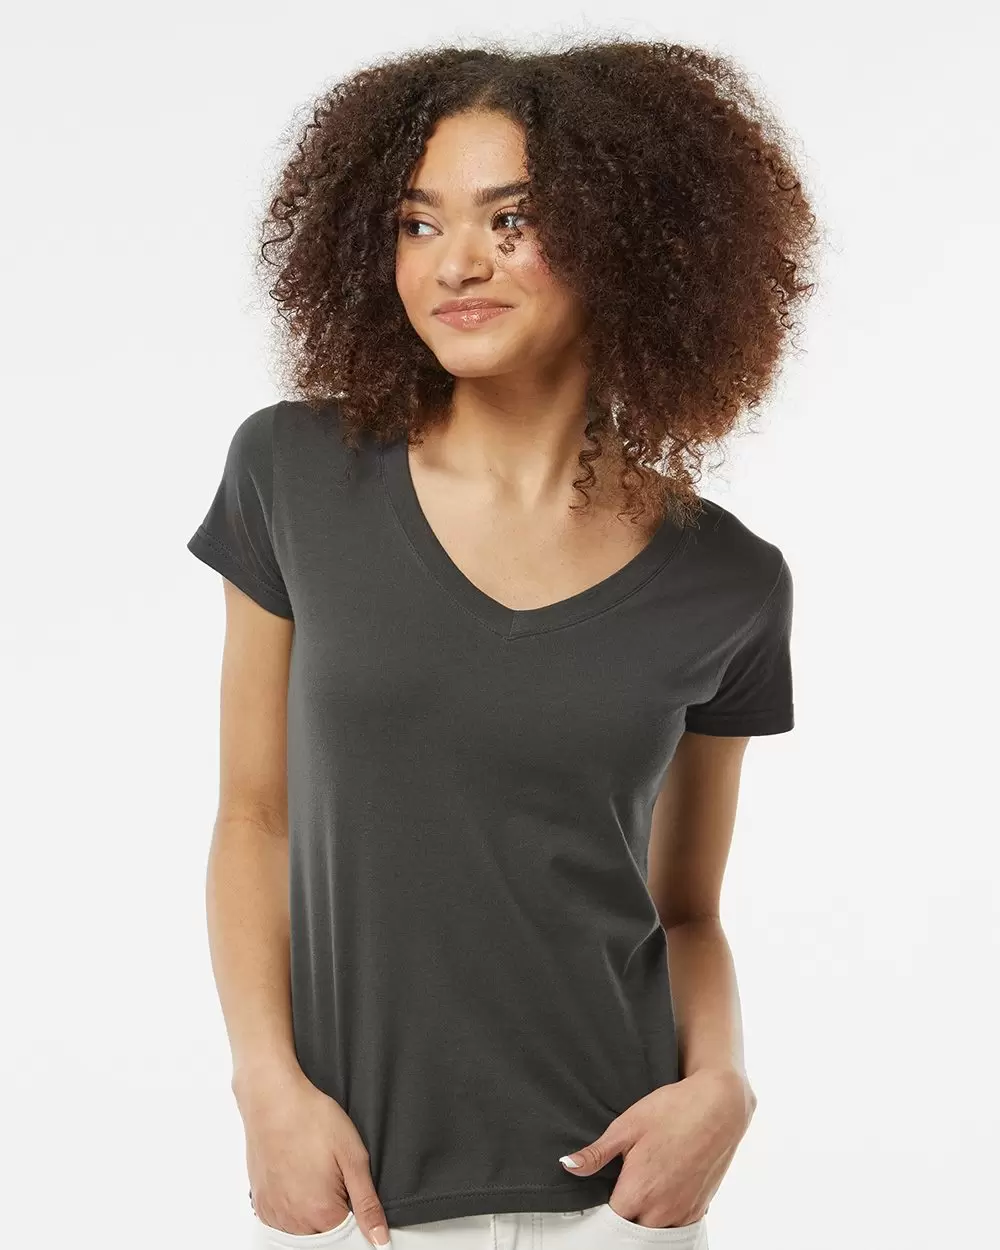 Tultex 0214 Ladies' Slim Fit Fine Jersey V Neck T Shirts - From $3.13